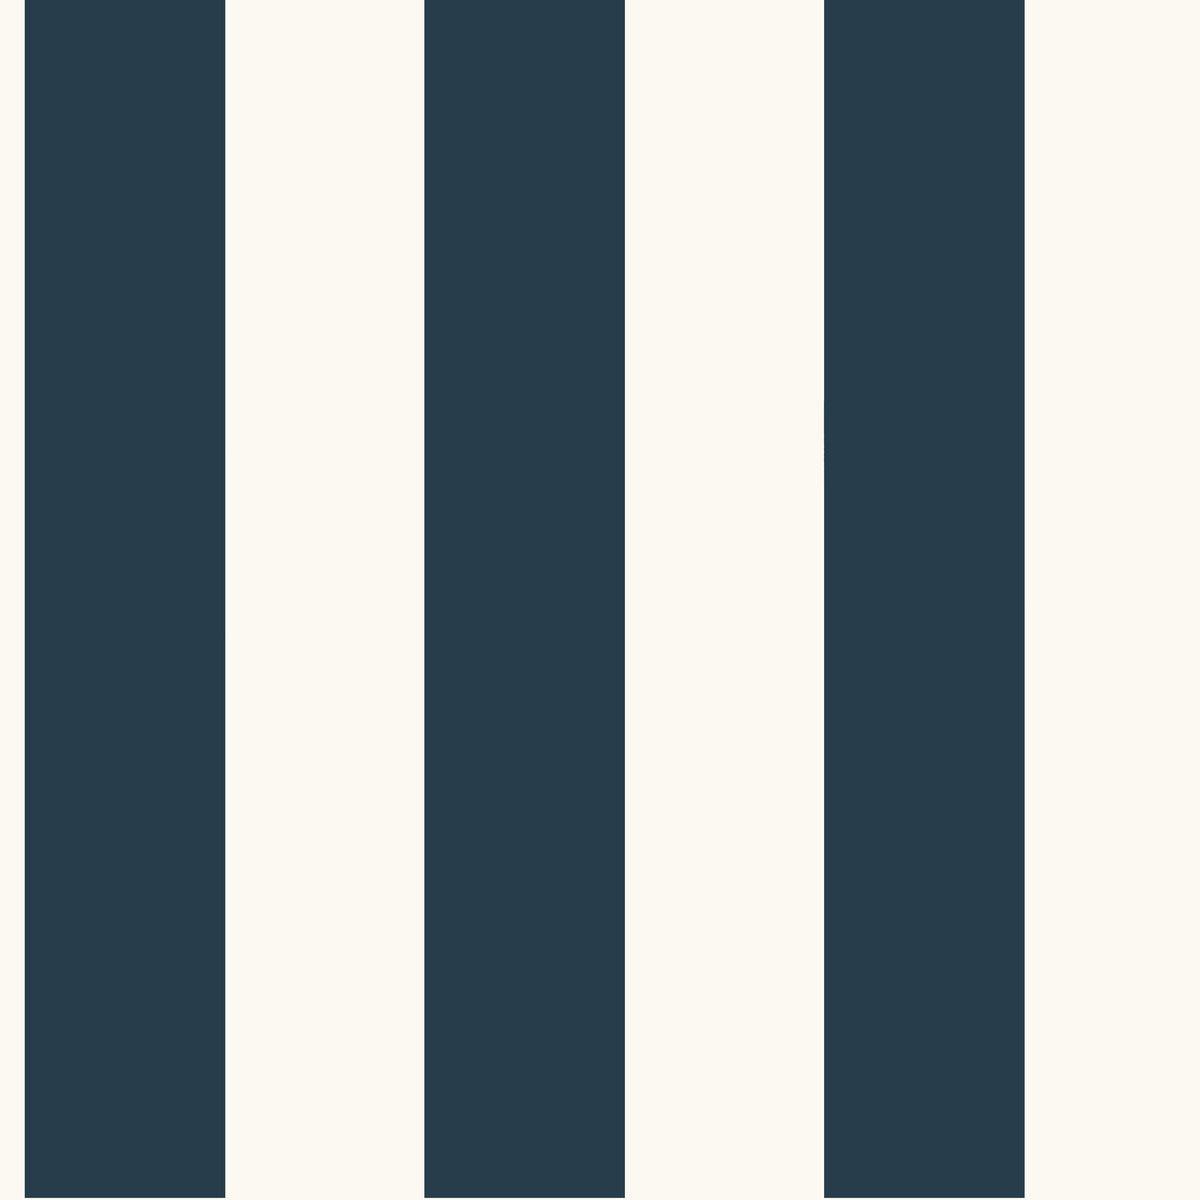 Waters Edge Resource Library Awning Stripe Wallpaper - SAMPLE